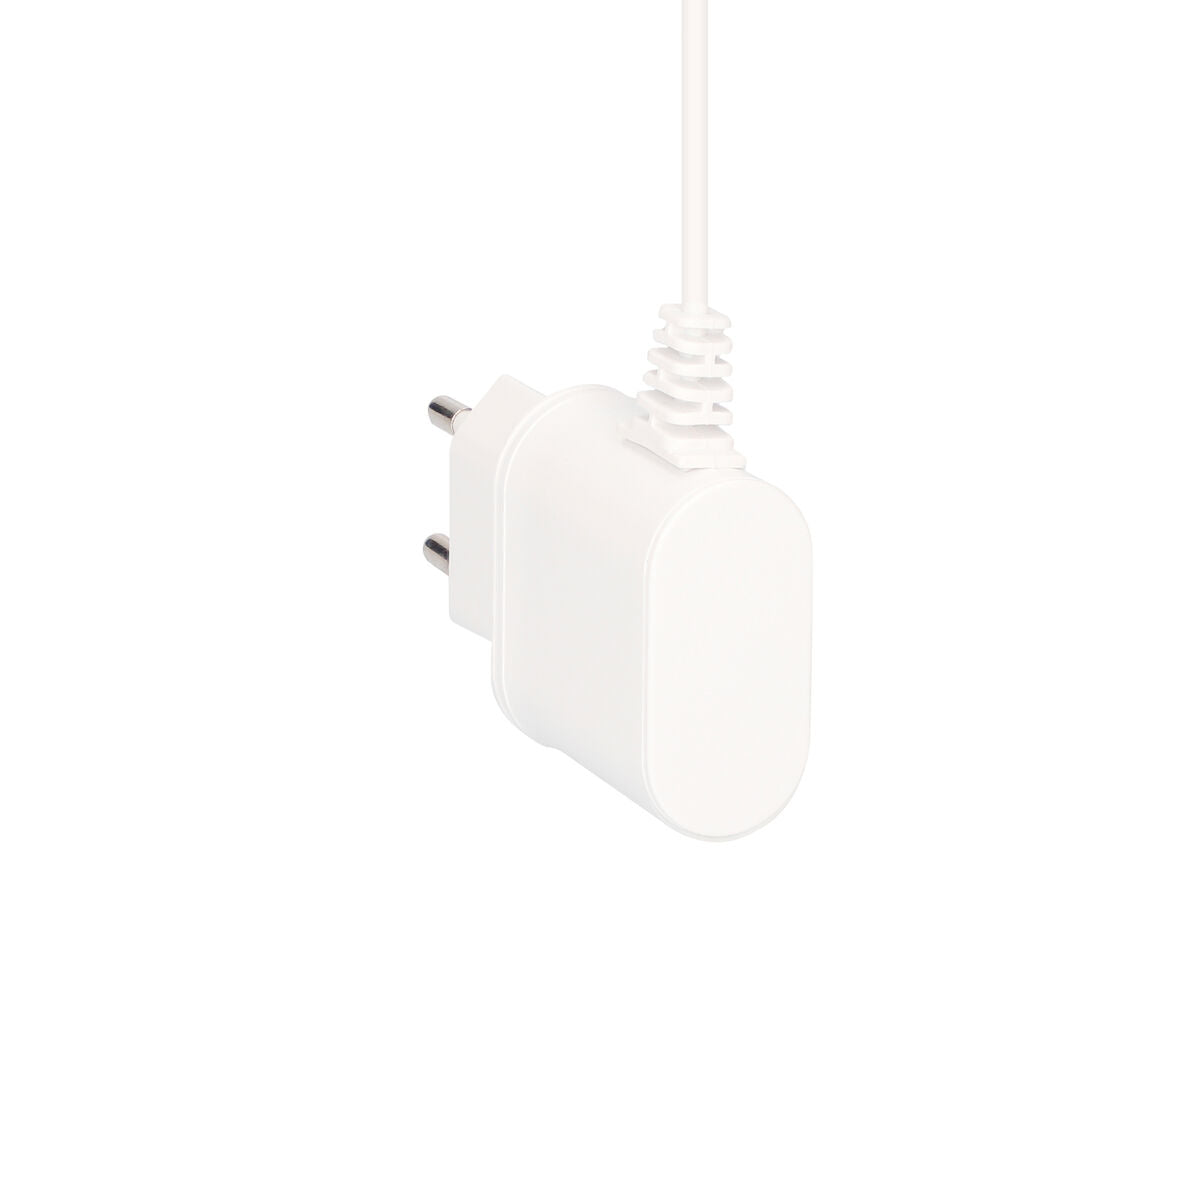 Wall Charger Lightning 1A Contact Apple-compatible iPhone